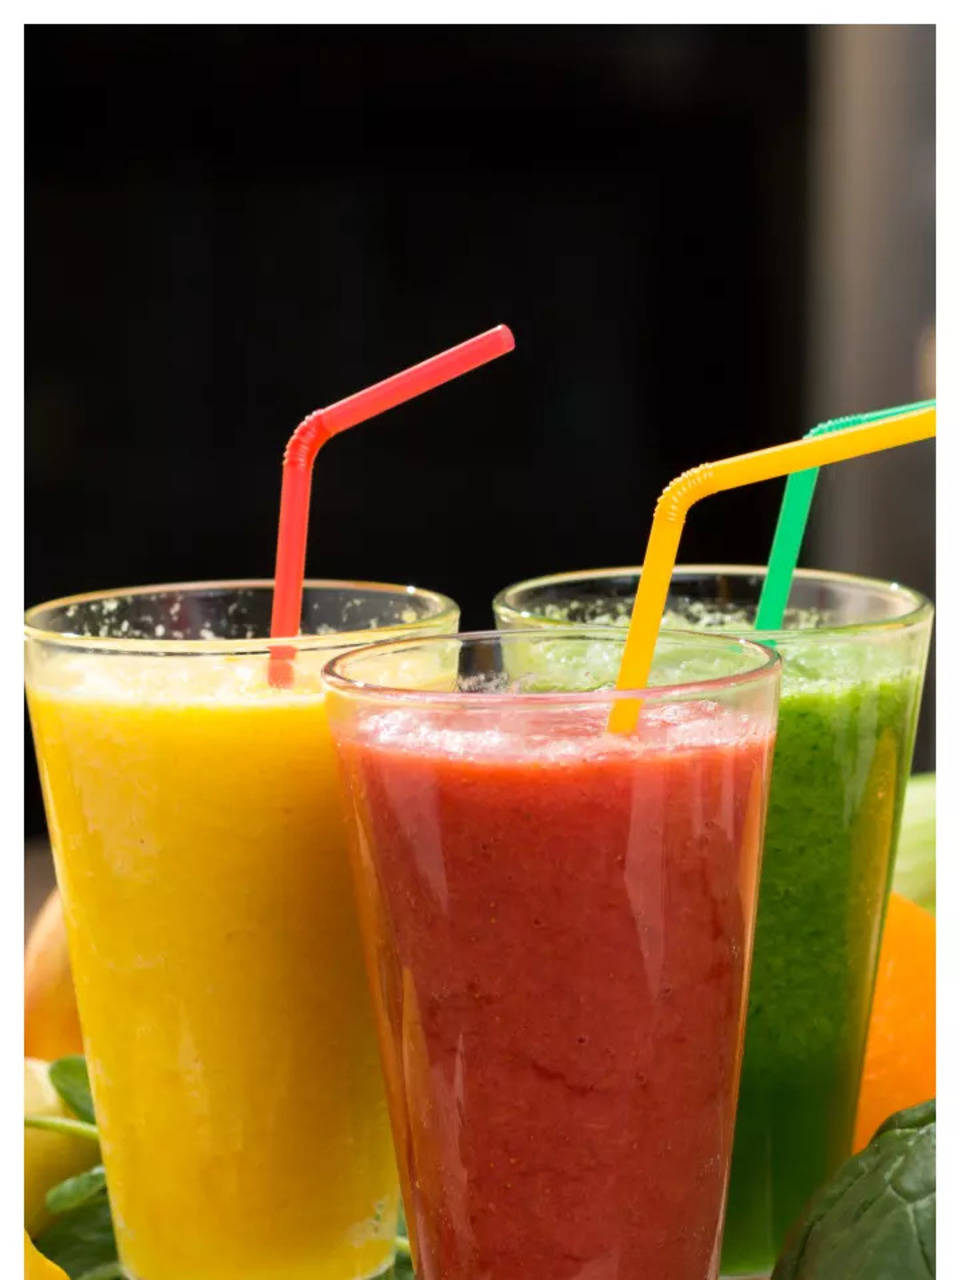 17 juices that help cure 17 health problems naturally | Times of India